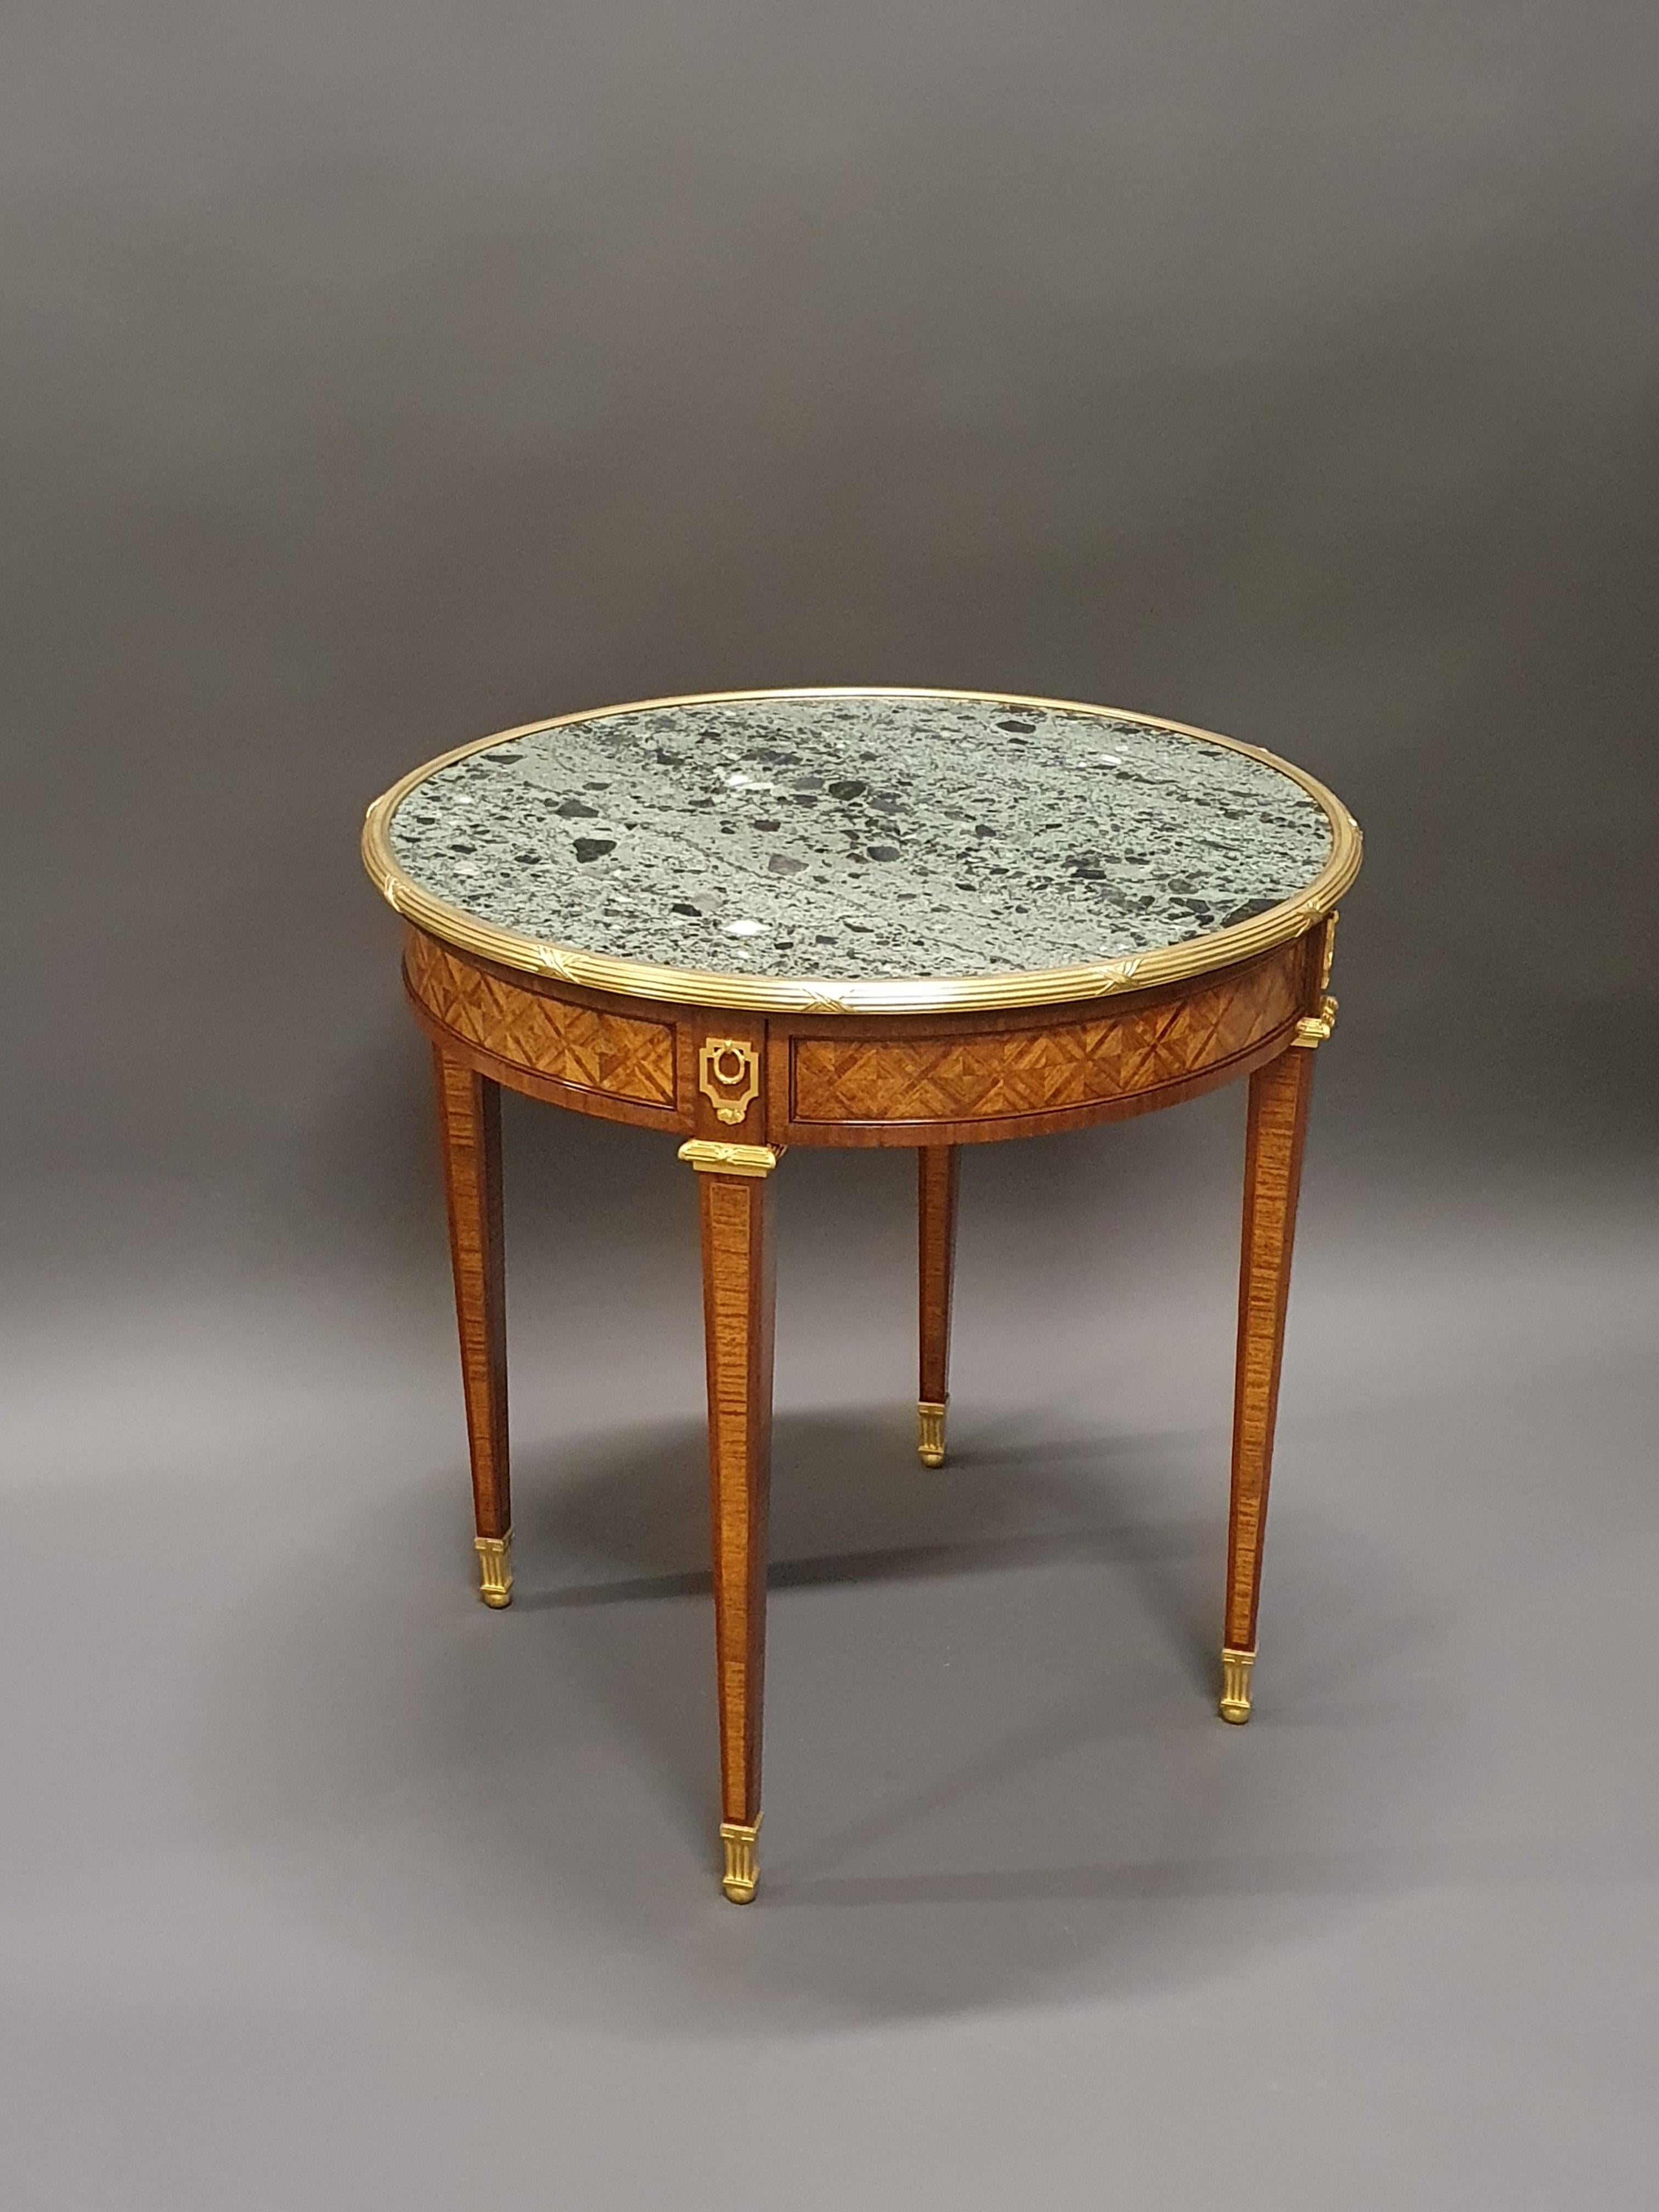 Large Louis XVI style gueridon table in kingwood marquetry with geometric shapes in mahogany frames.

Beautiful finely chiseled gilt bronze ornamentation.

Magnificent green breccia marble top.

Parisian work of good quality from the end of